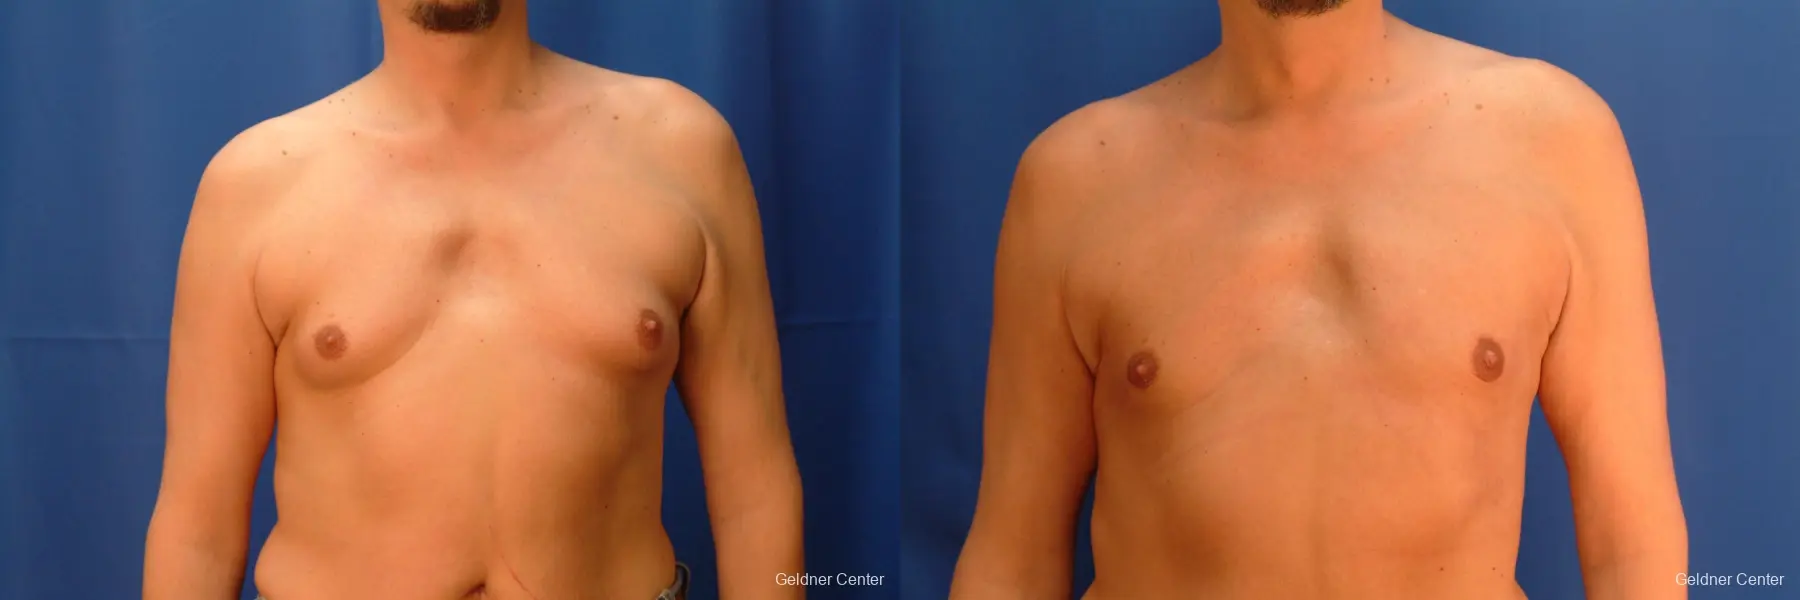 Gynecomastia: Patient 6 - Before and After  